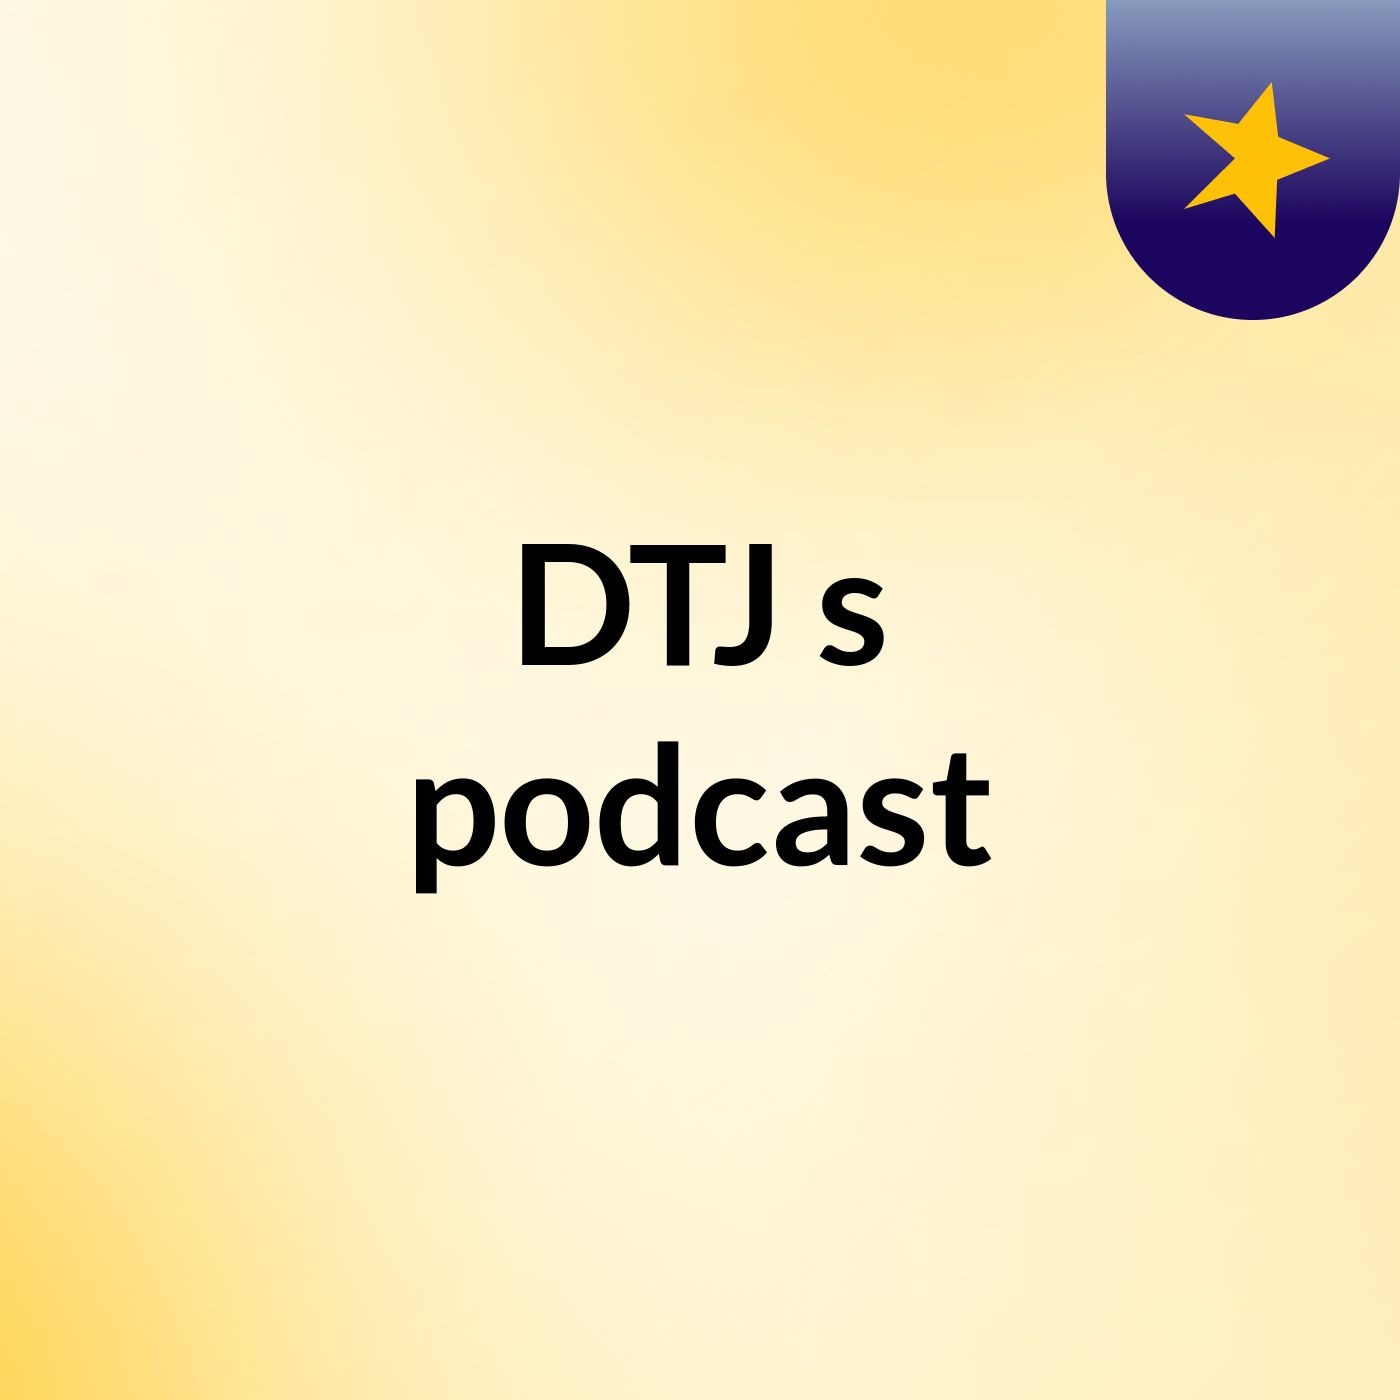 DTJ's podcast